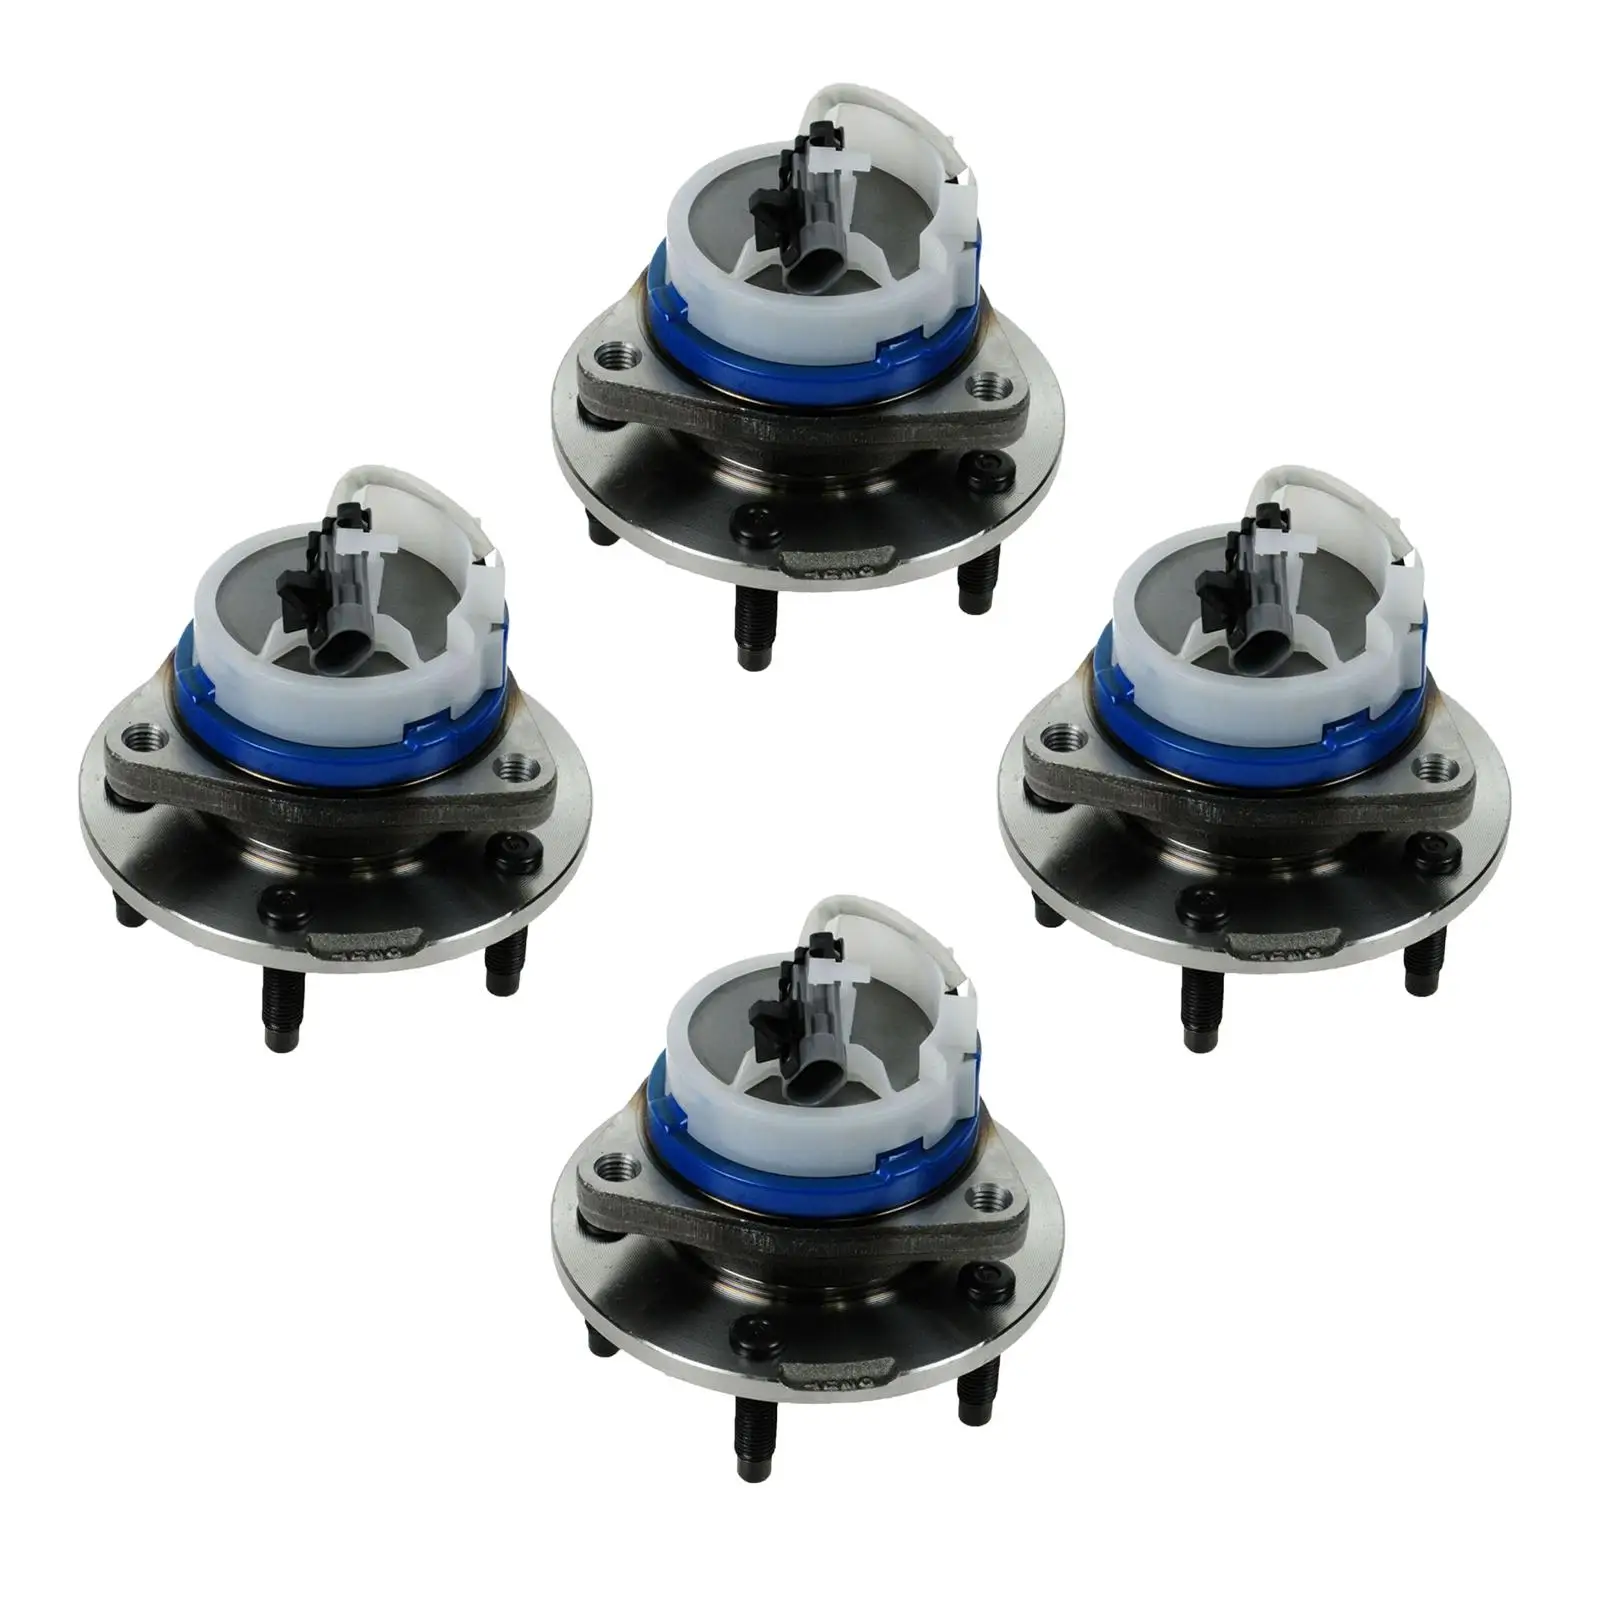 25693148 Replacement Car Accessories Wheel Hub Bearing Set for Cadillac Sts